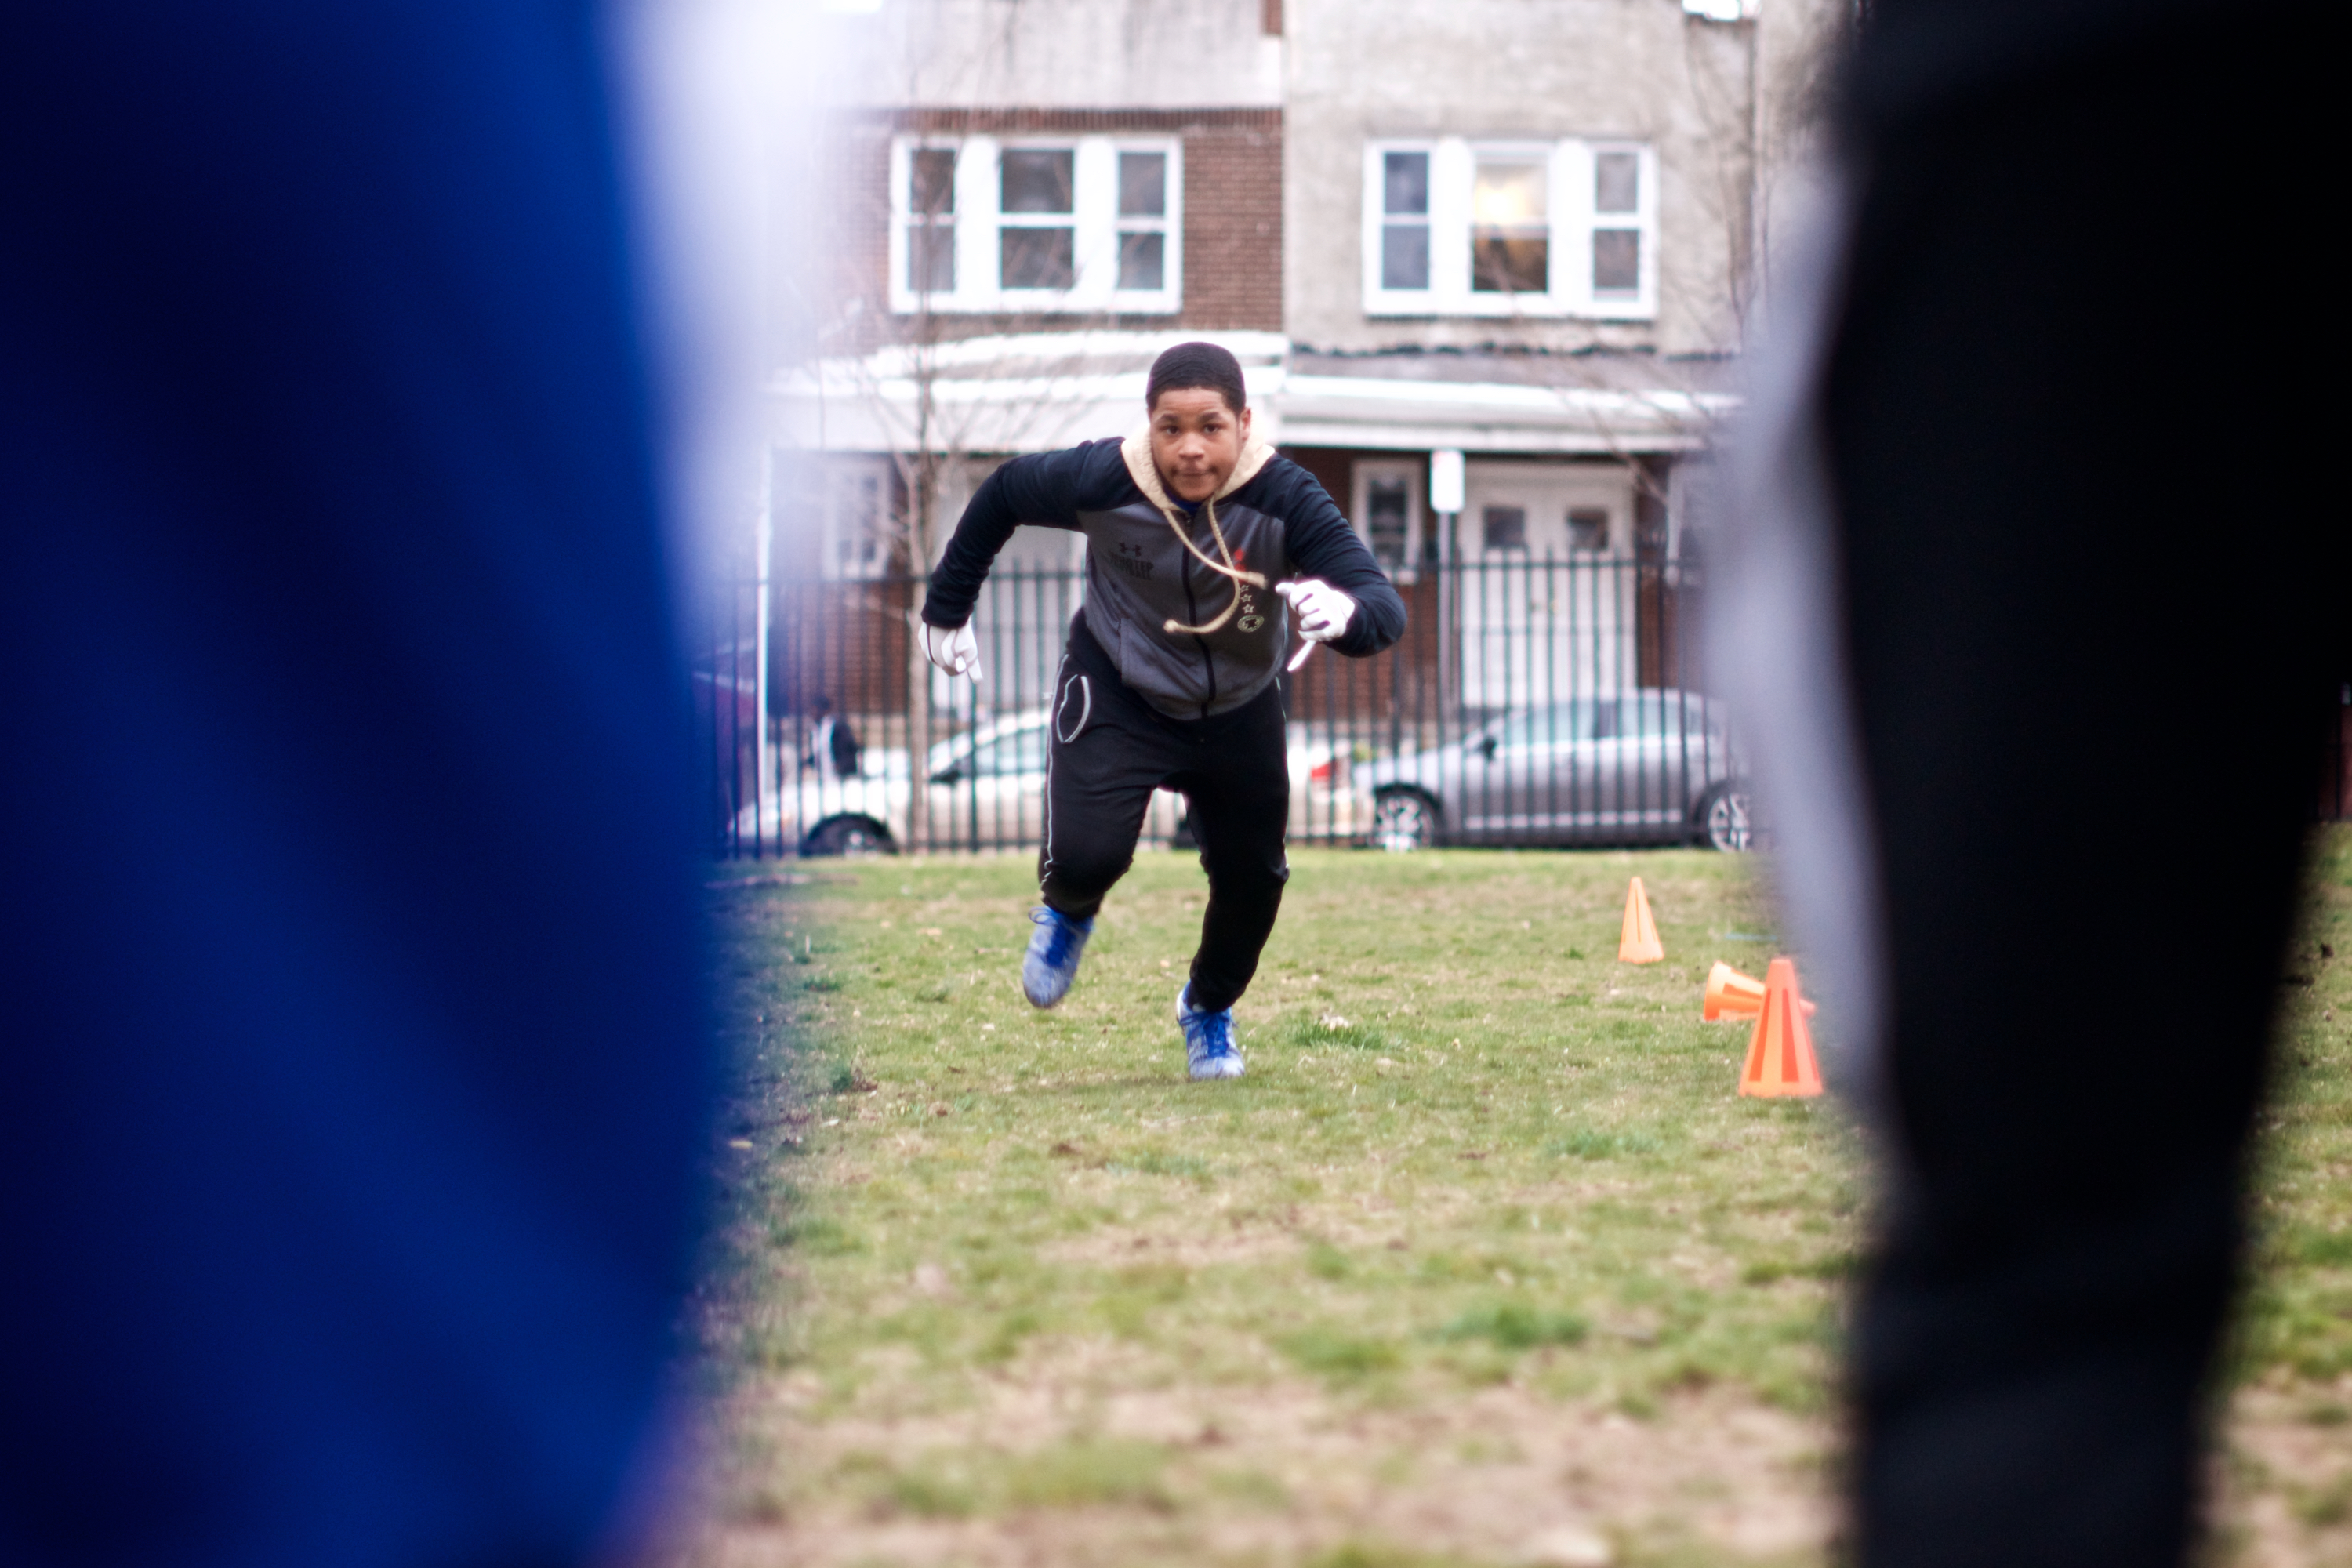 National championship-winning NW Raiders youth football team practices on a patchy city-owned field in East Germantown. (Bastiaan Slabbers for WHYY)